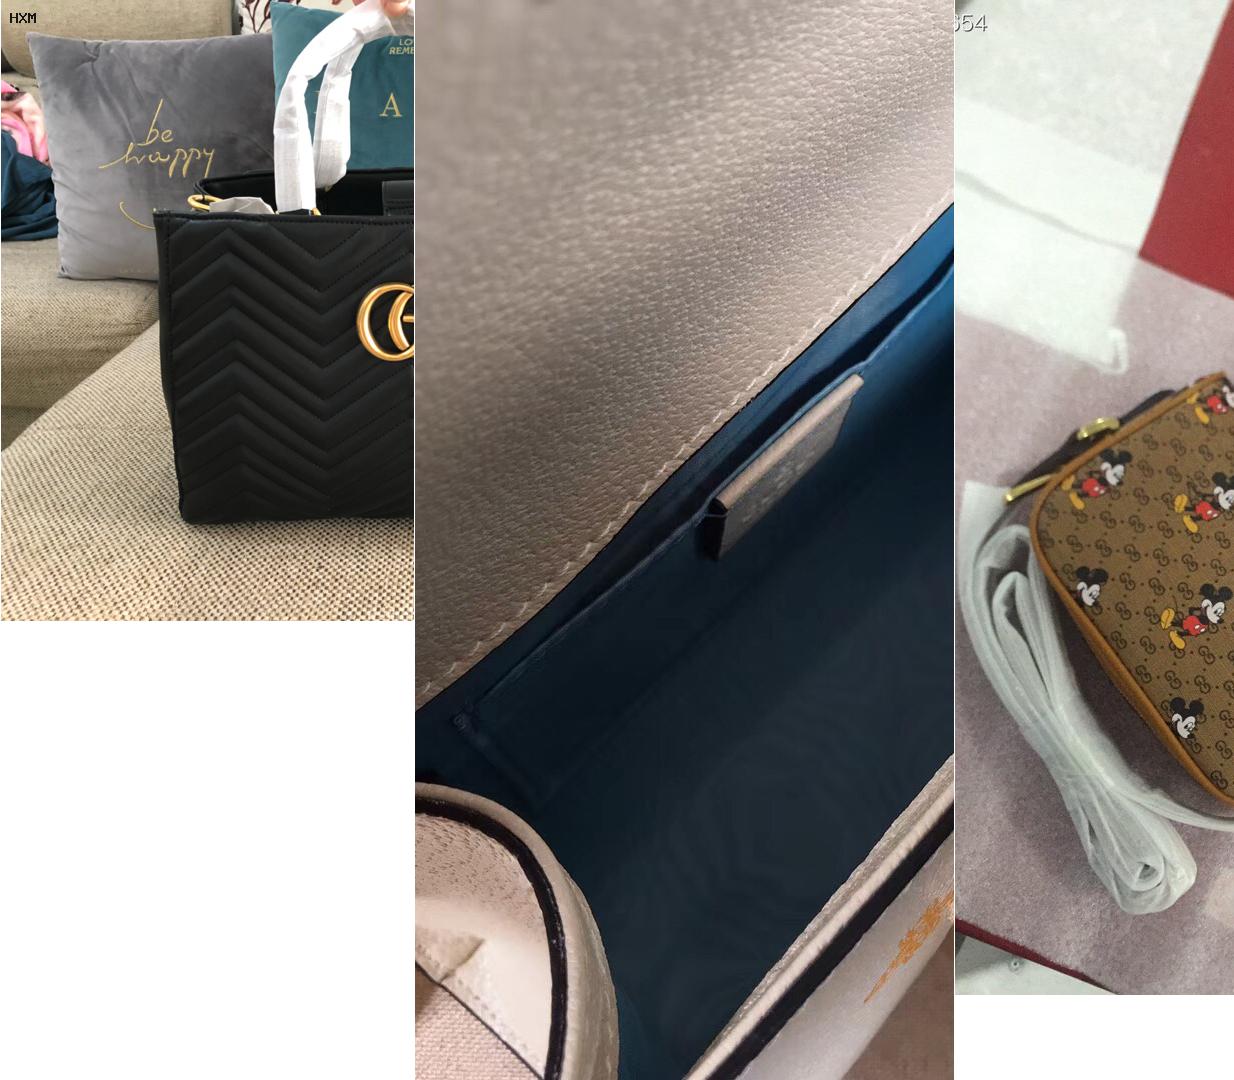 bolsos gucci outlet online